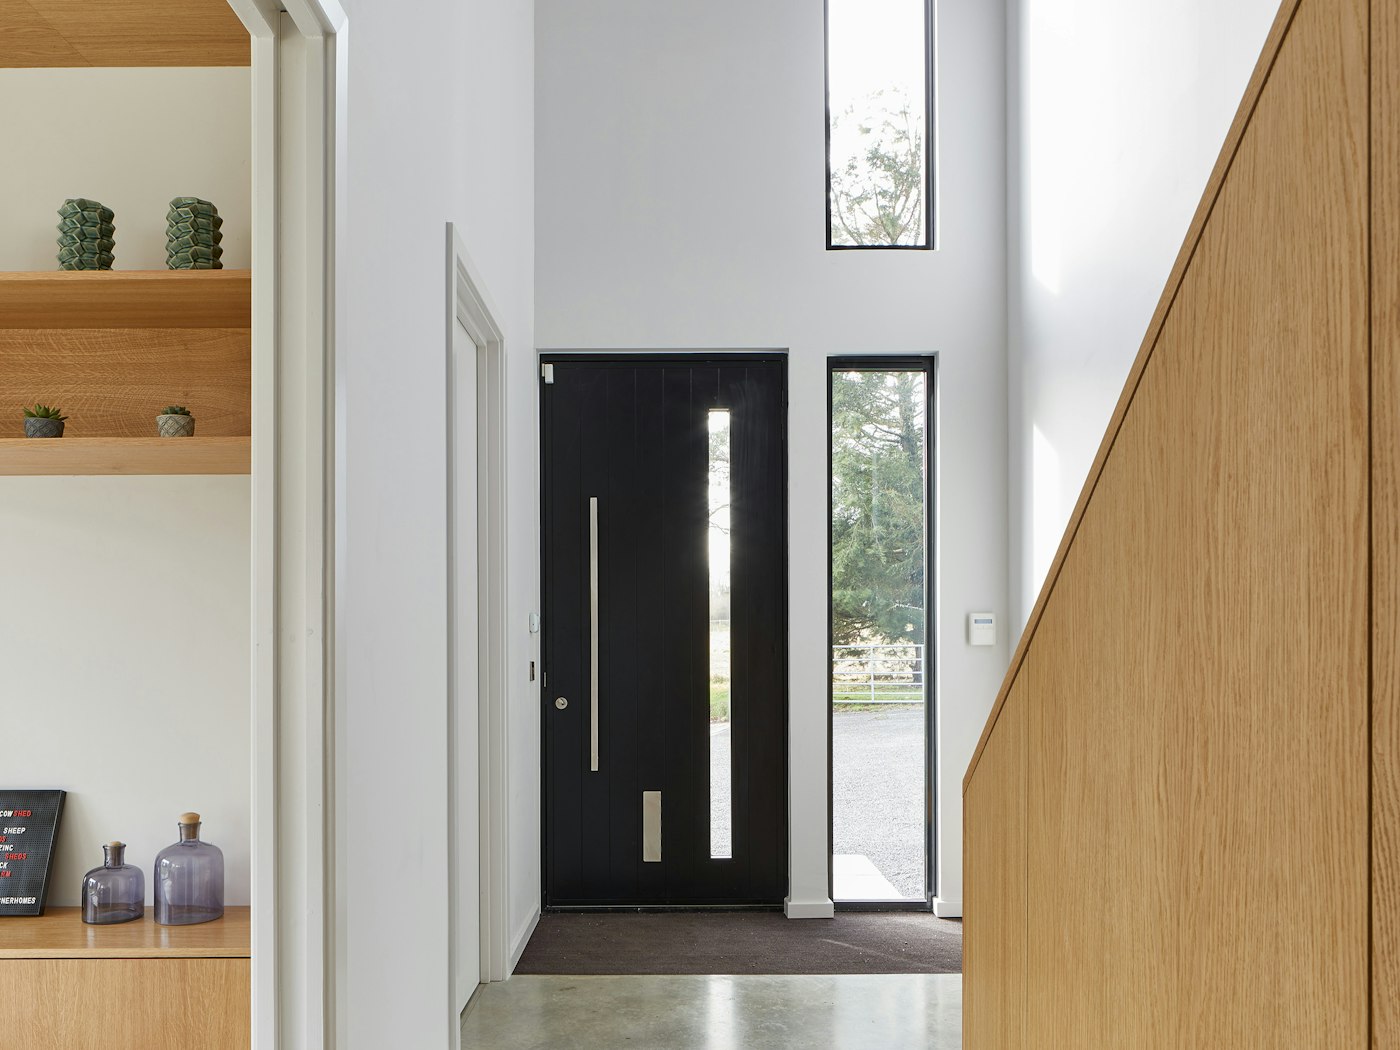 And inside the modern black door sits in a fresh hallway with ample light provided by the door's glass panel & additional windows